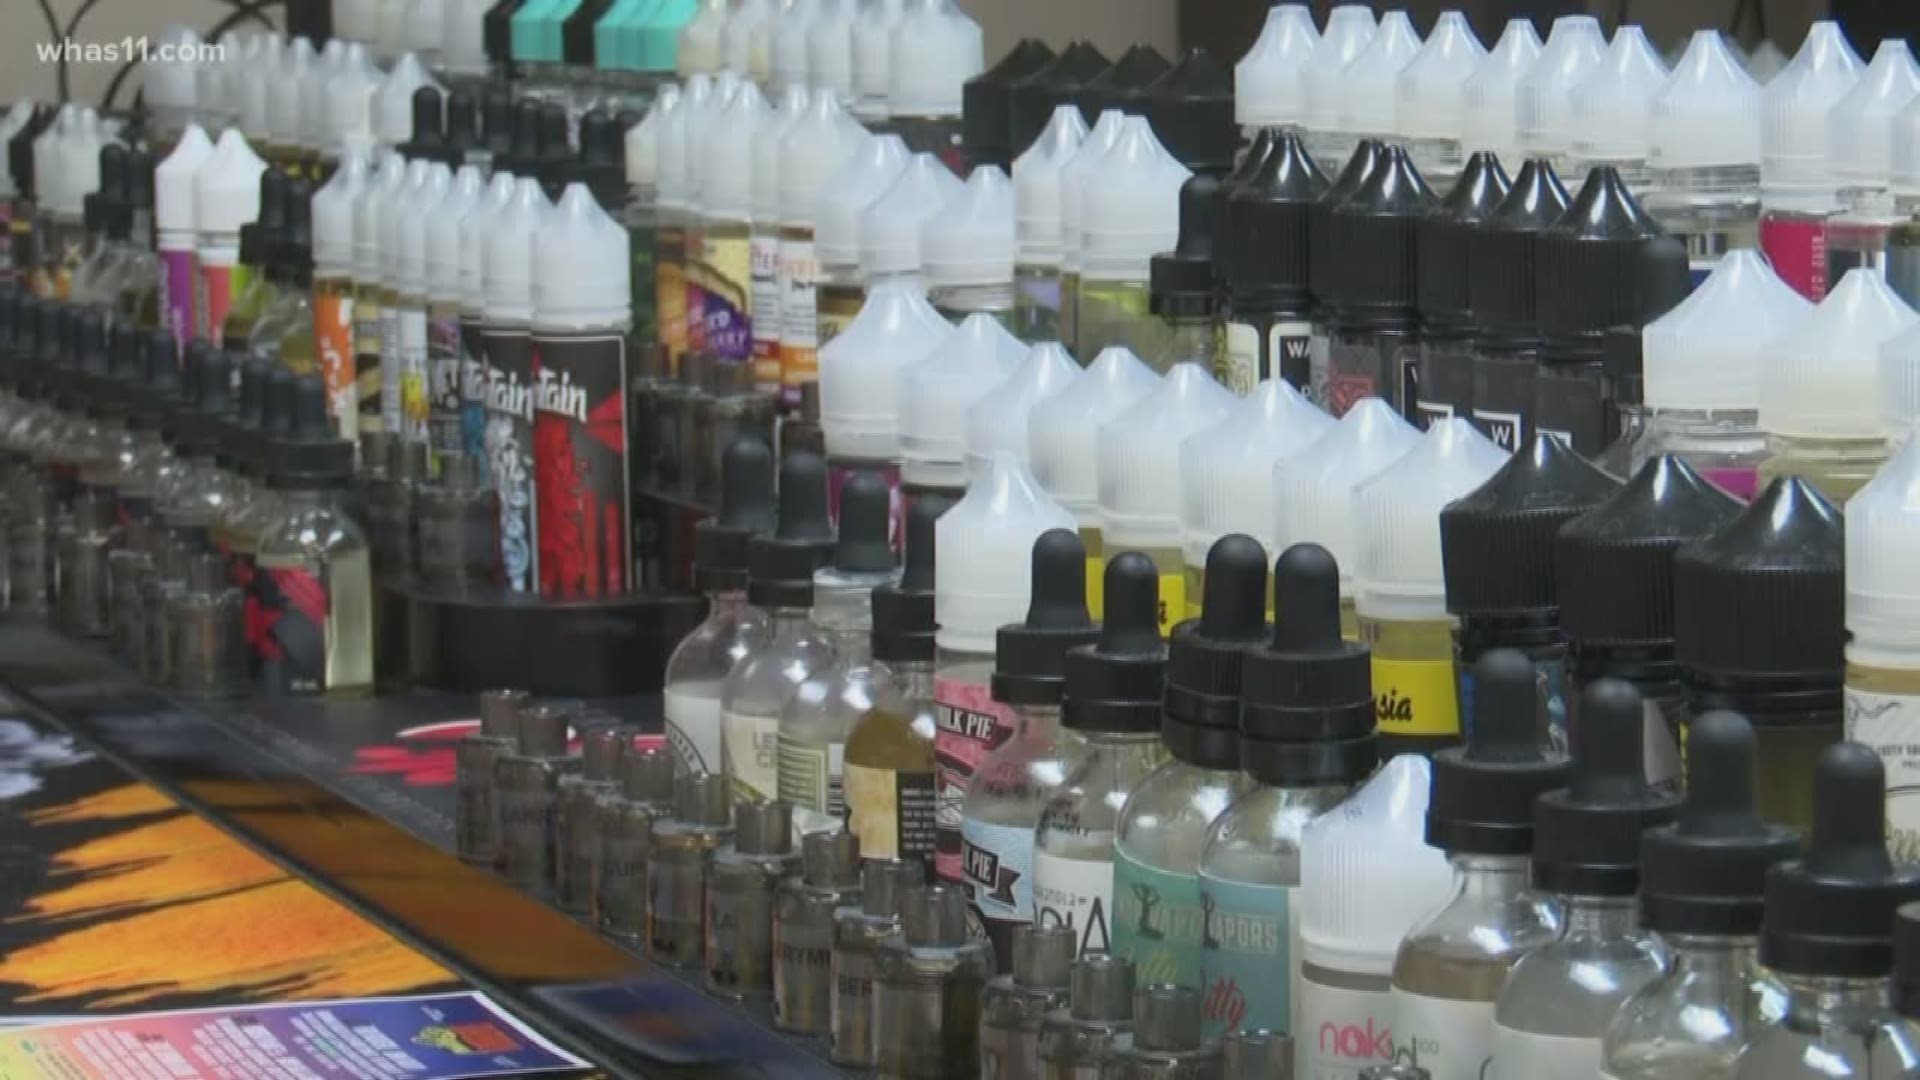 Troy LaBlanc says placing too many bans on the industry will drive e-cigarette users to the black market instead.